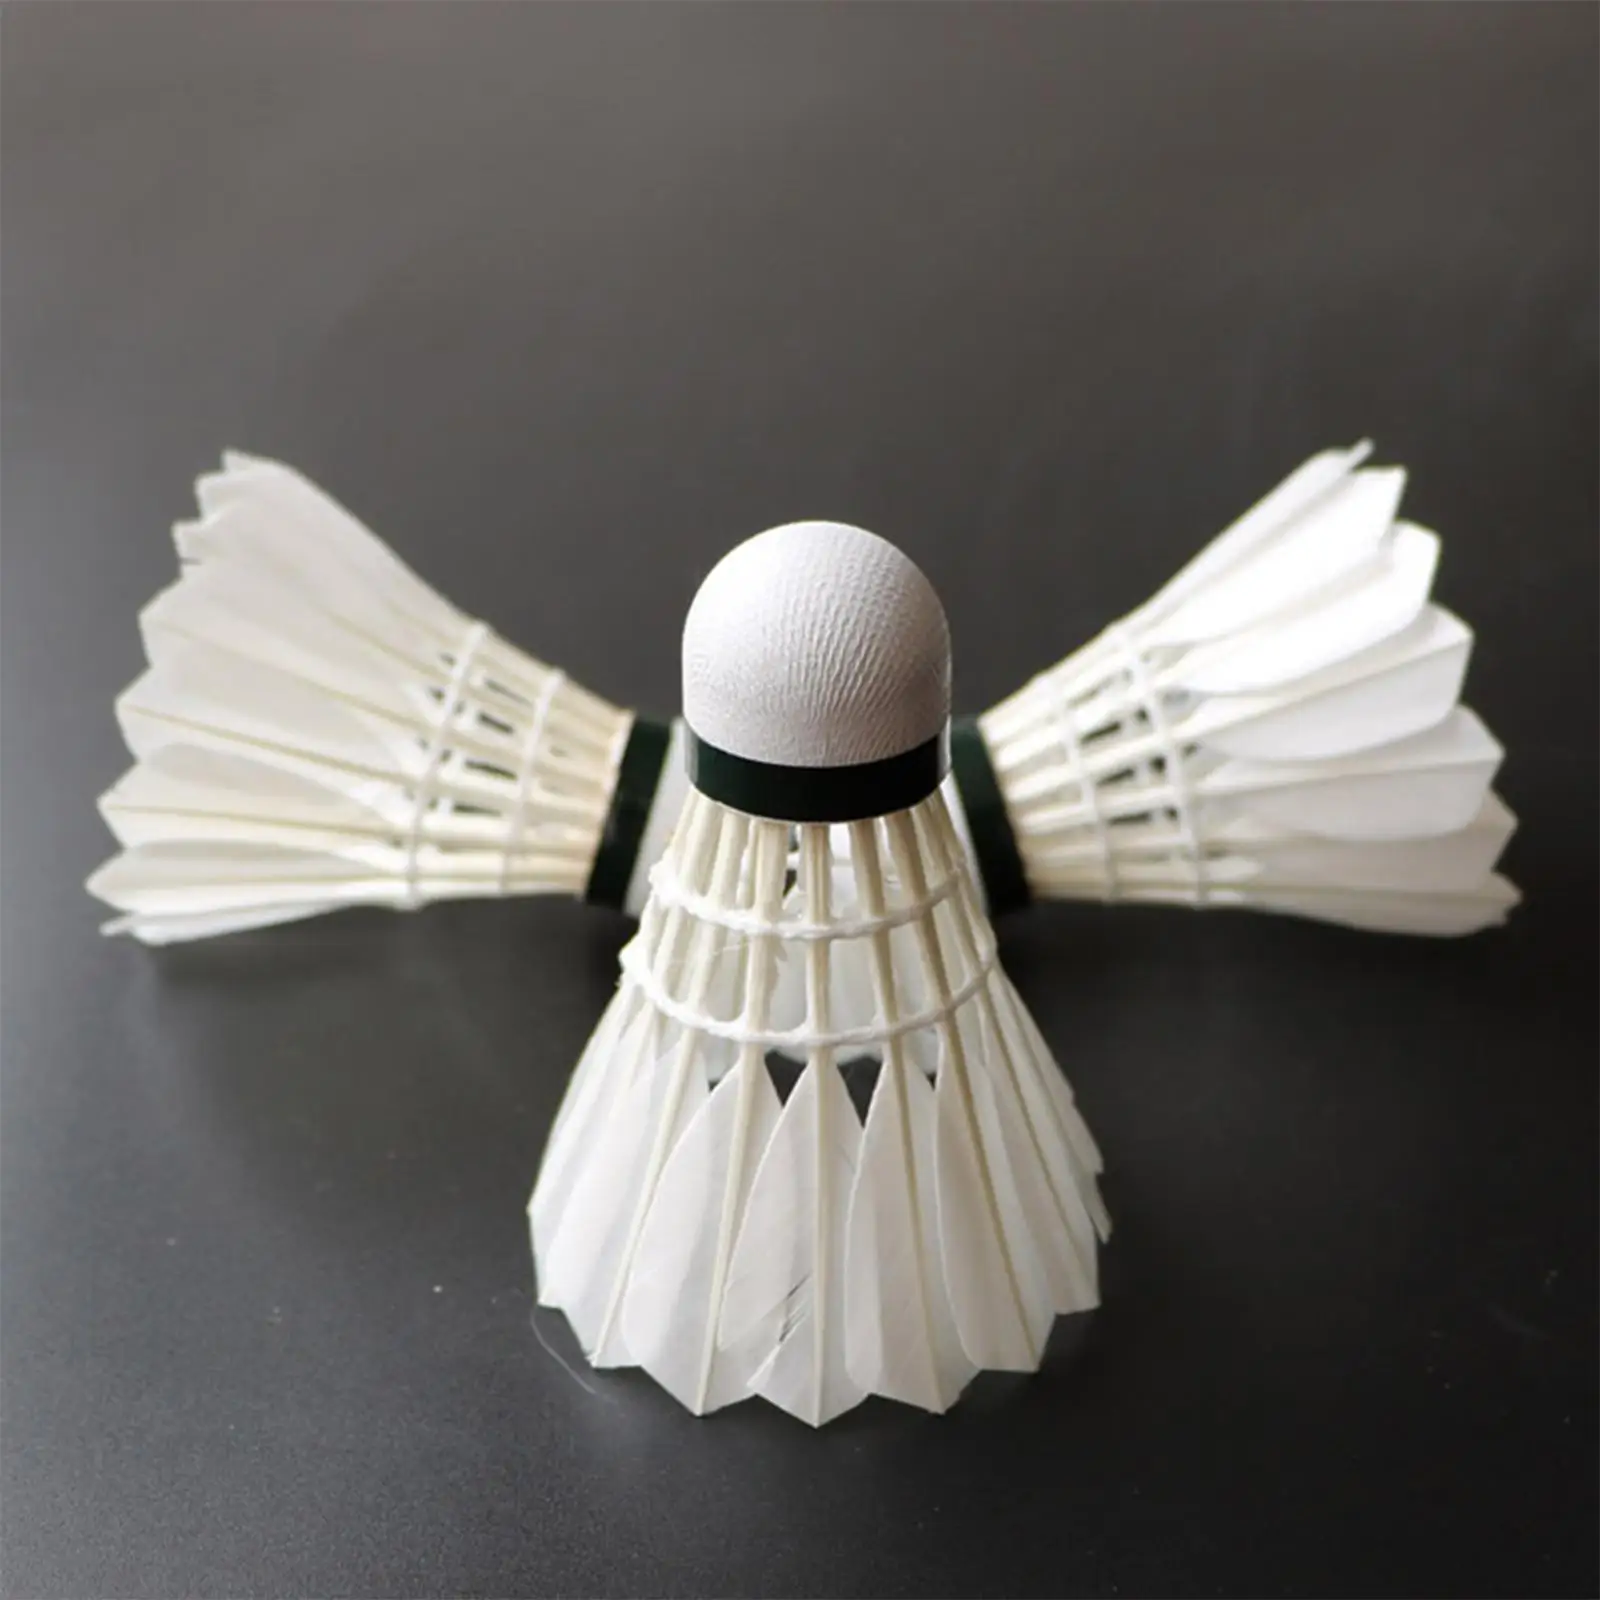 3Pcs Badminton Shuttlecocks for Recreational Game Play Sports Activities